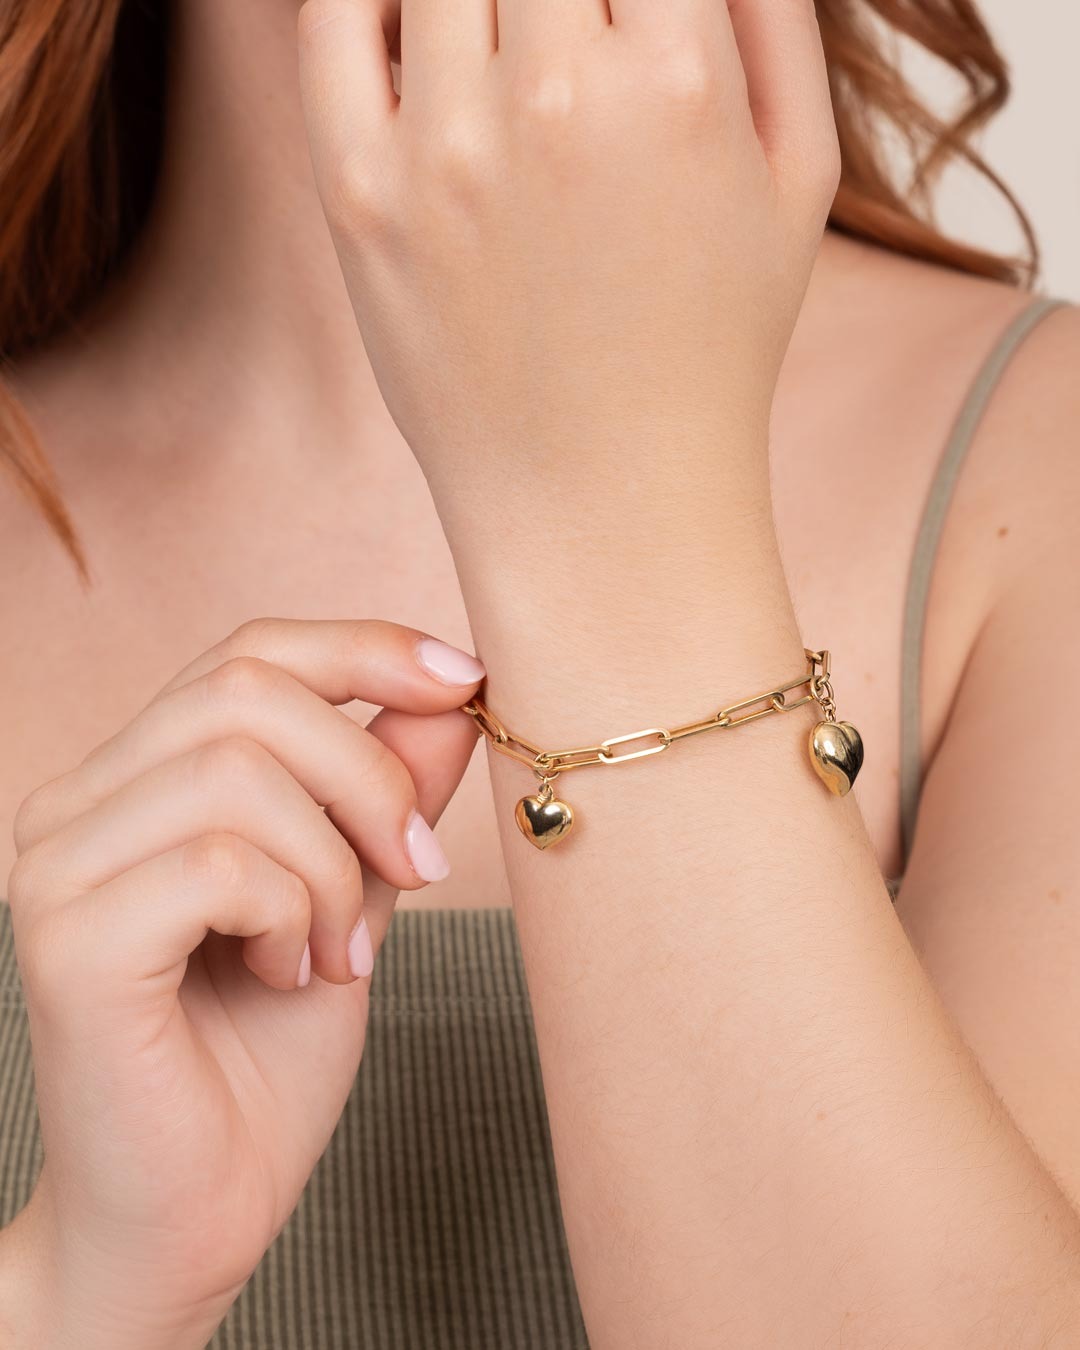 14K GOLD PAPERCLIP BRACELET WITH HEART CHARMS